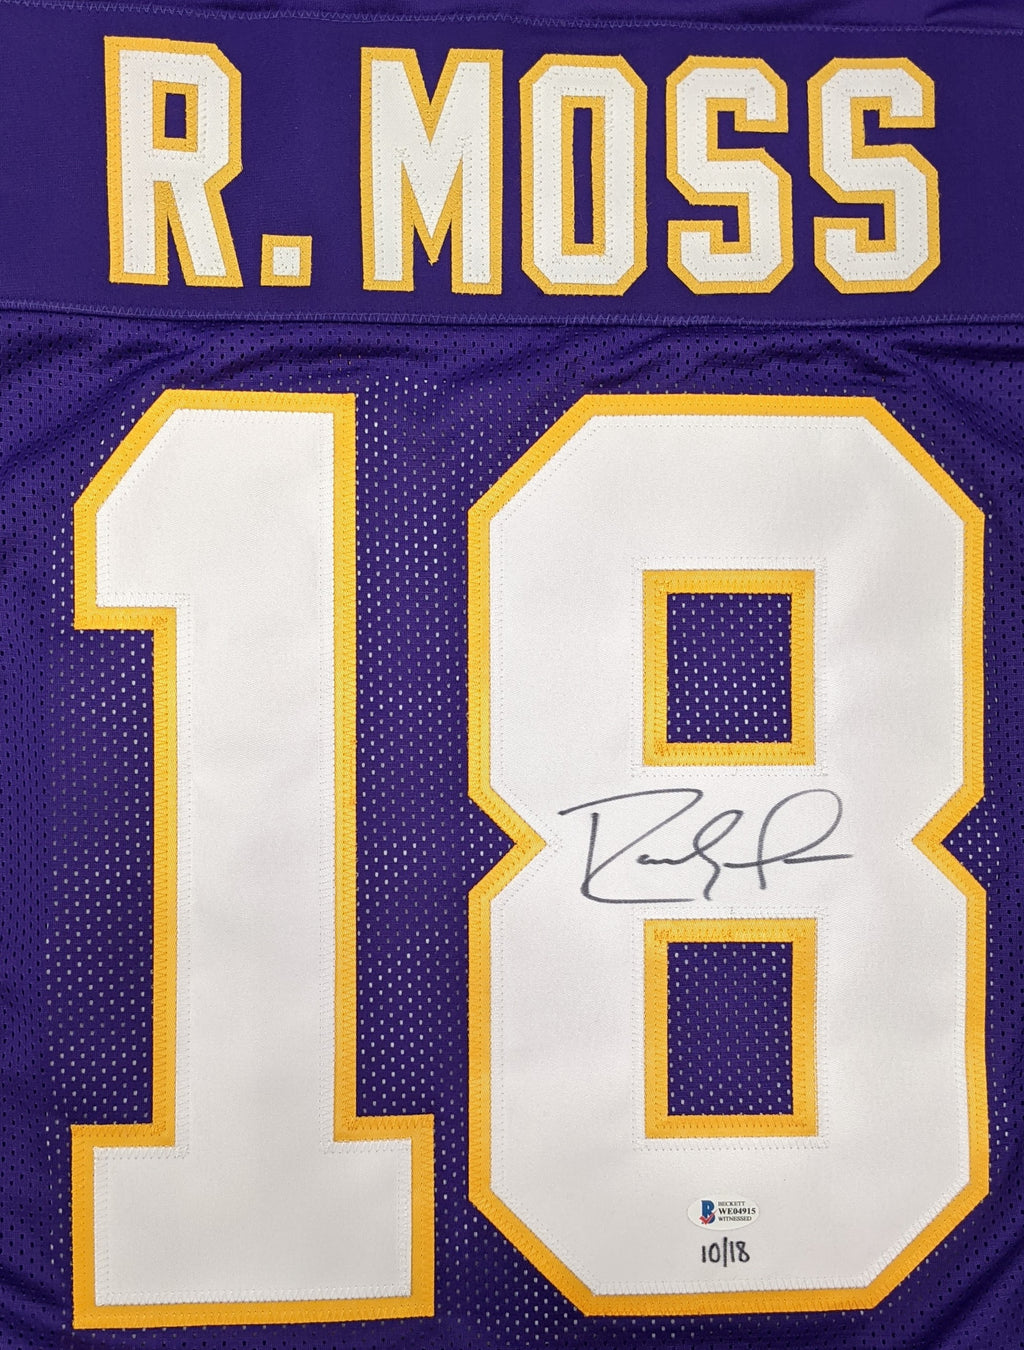 Randy Moss Autographed #18 Rookie Training Camp Purple Pro-Style Jersey (Standard Number) Autographs FanHQ   